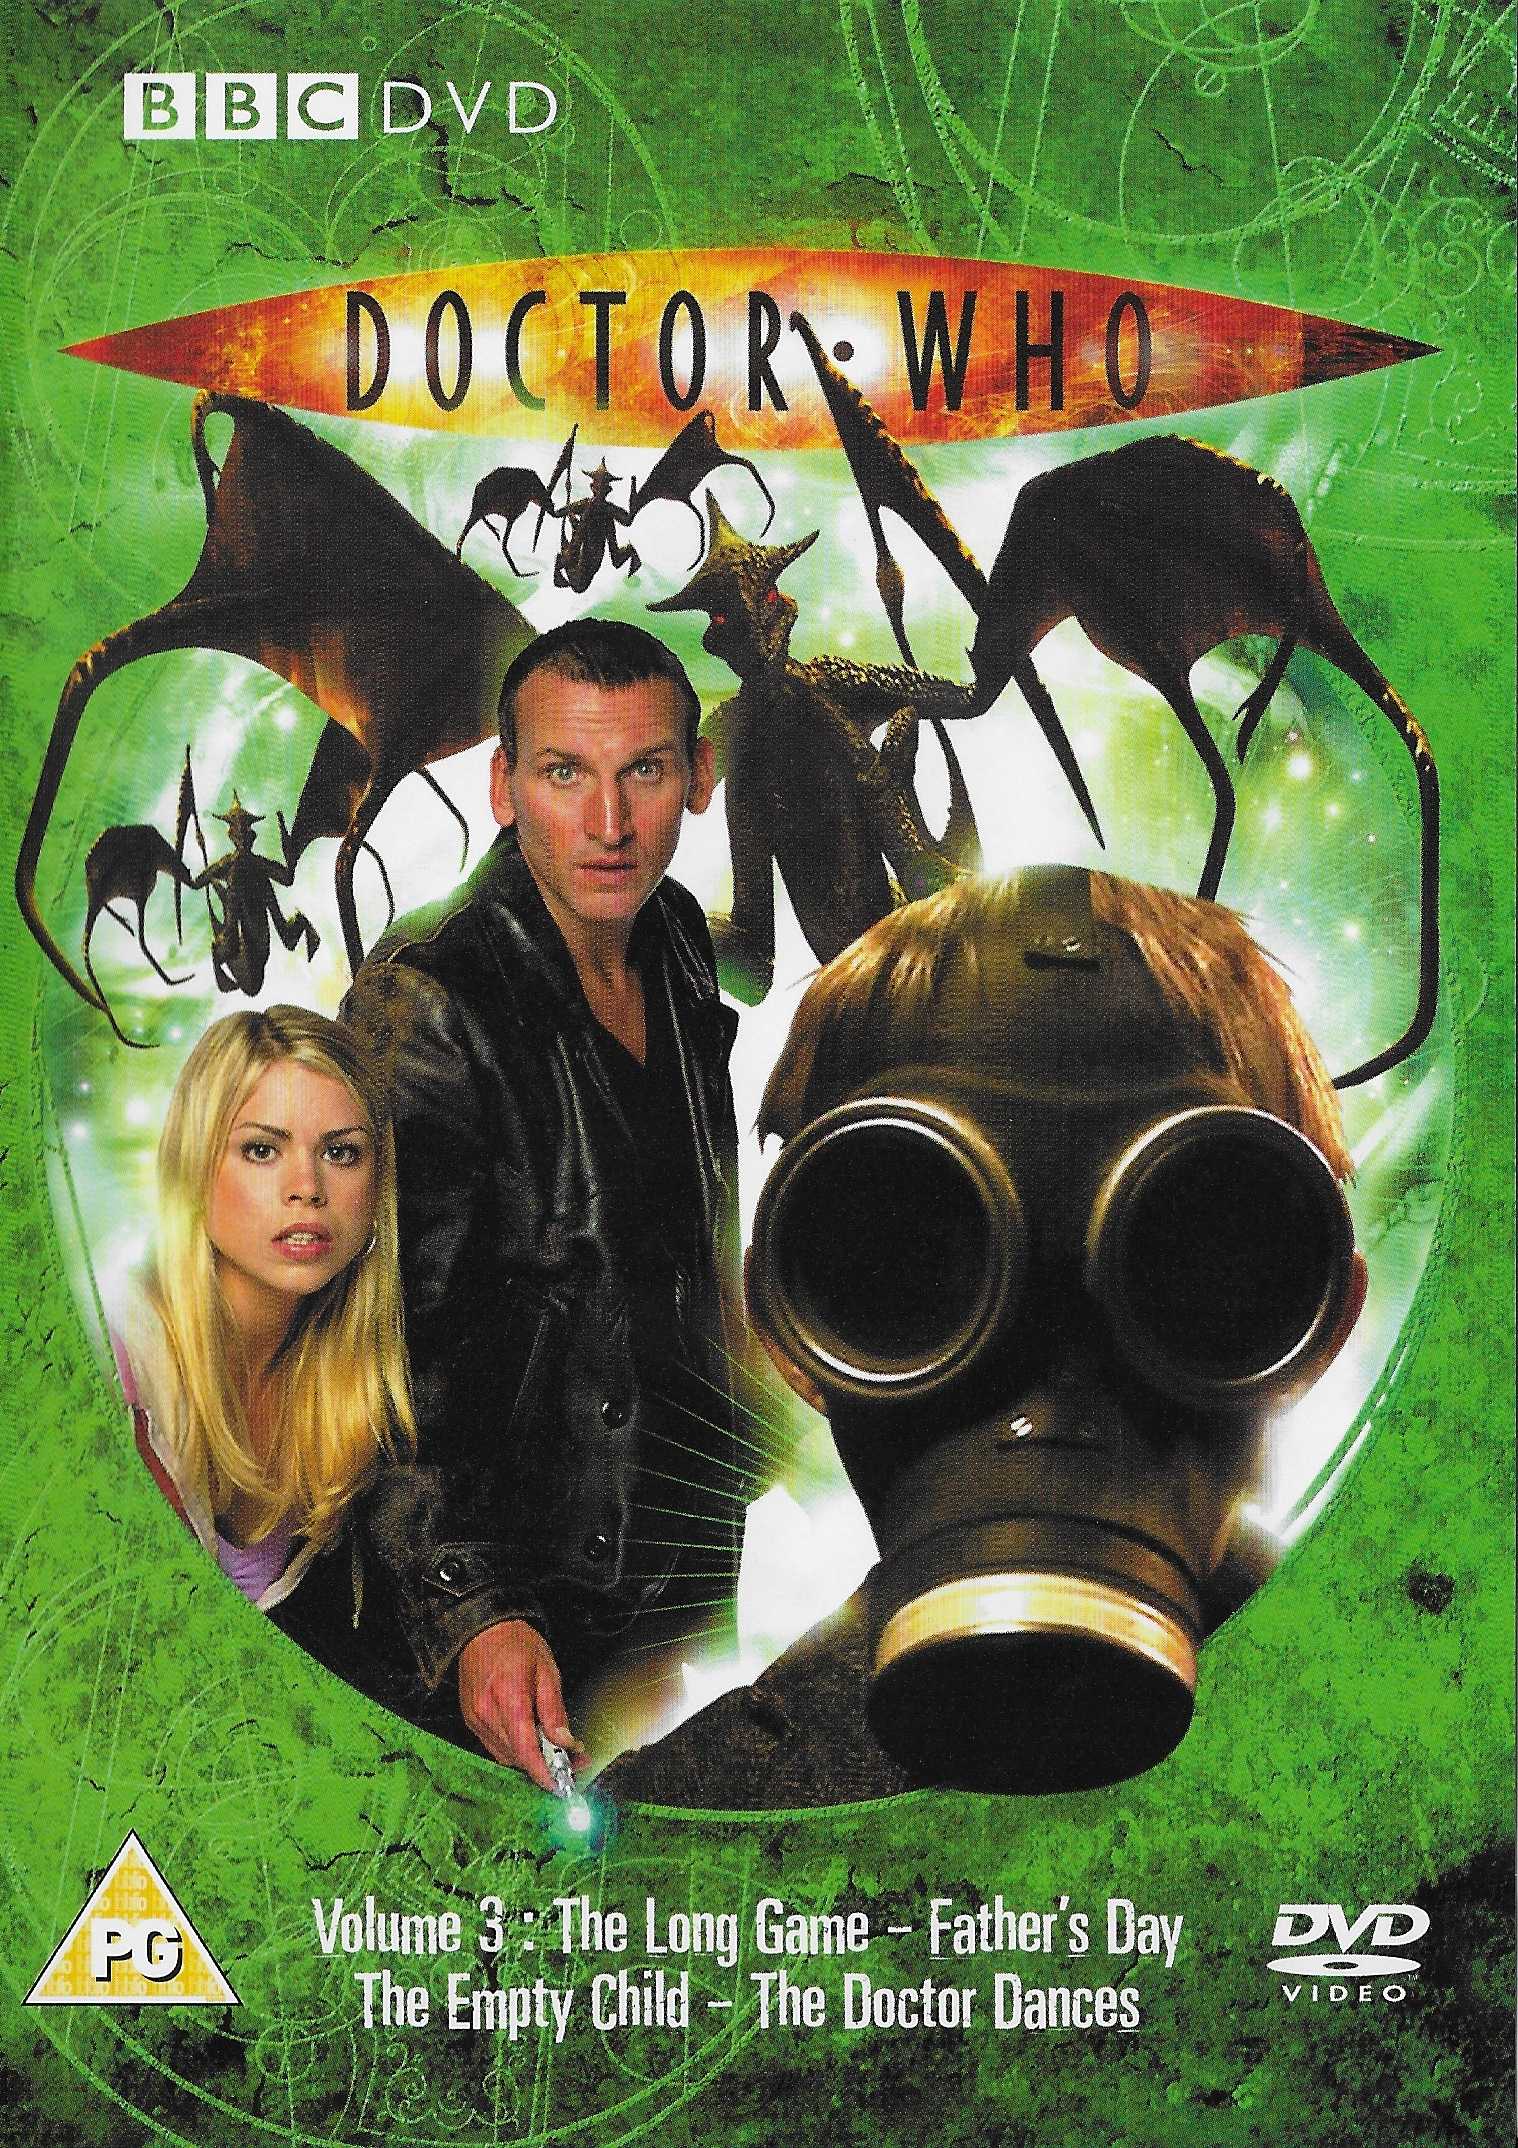 Picture of BBCDVD 1757 Doctor Who - New series, volume 3 by artist Russell T Davies / Paul Cornell / Steven Moffat from the BBC records and Tapes library